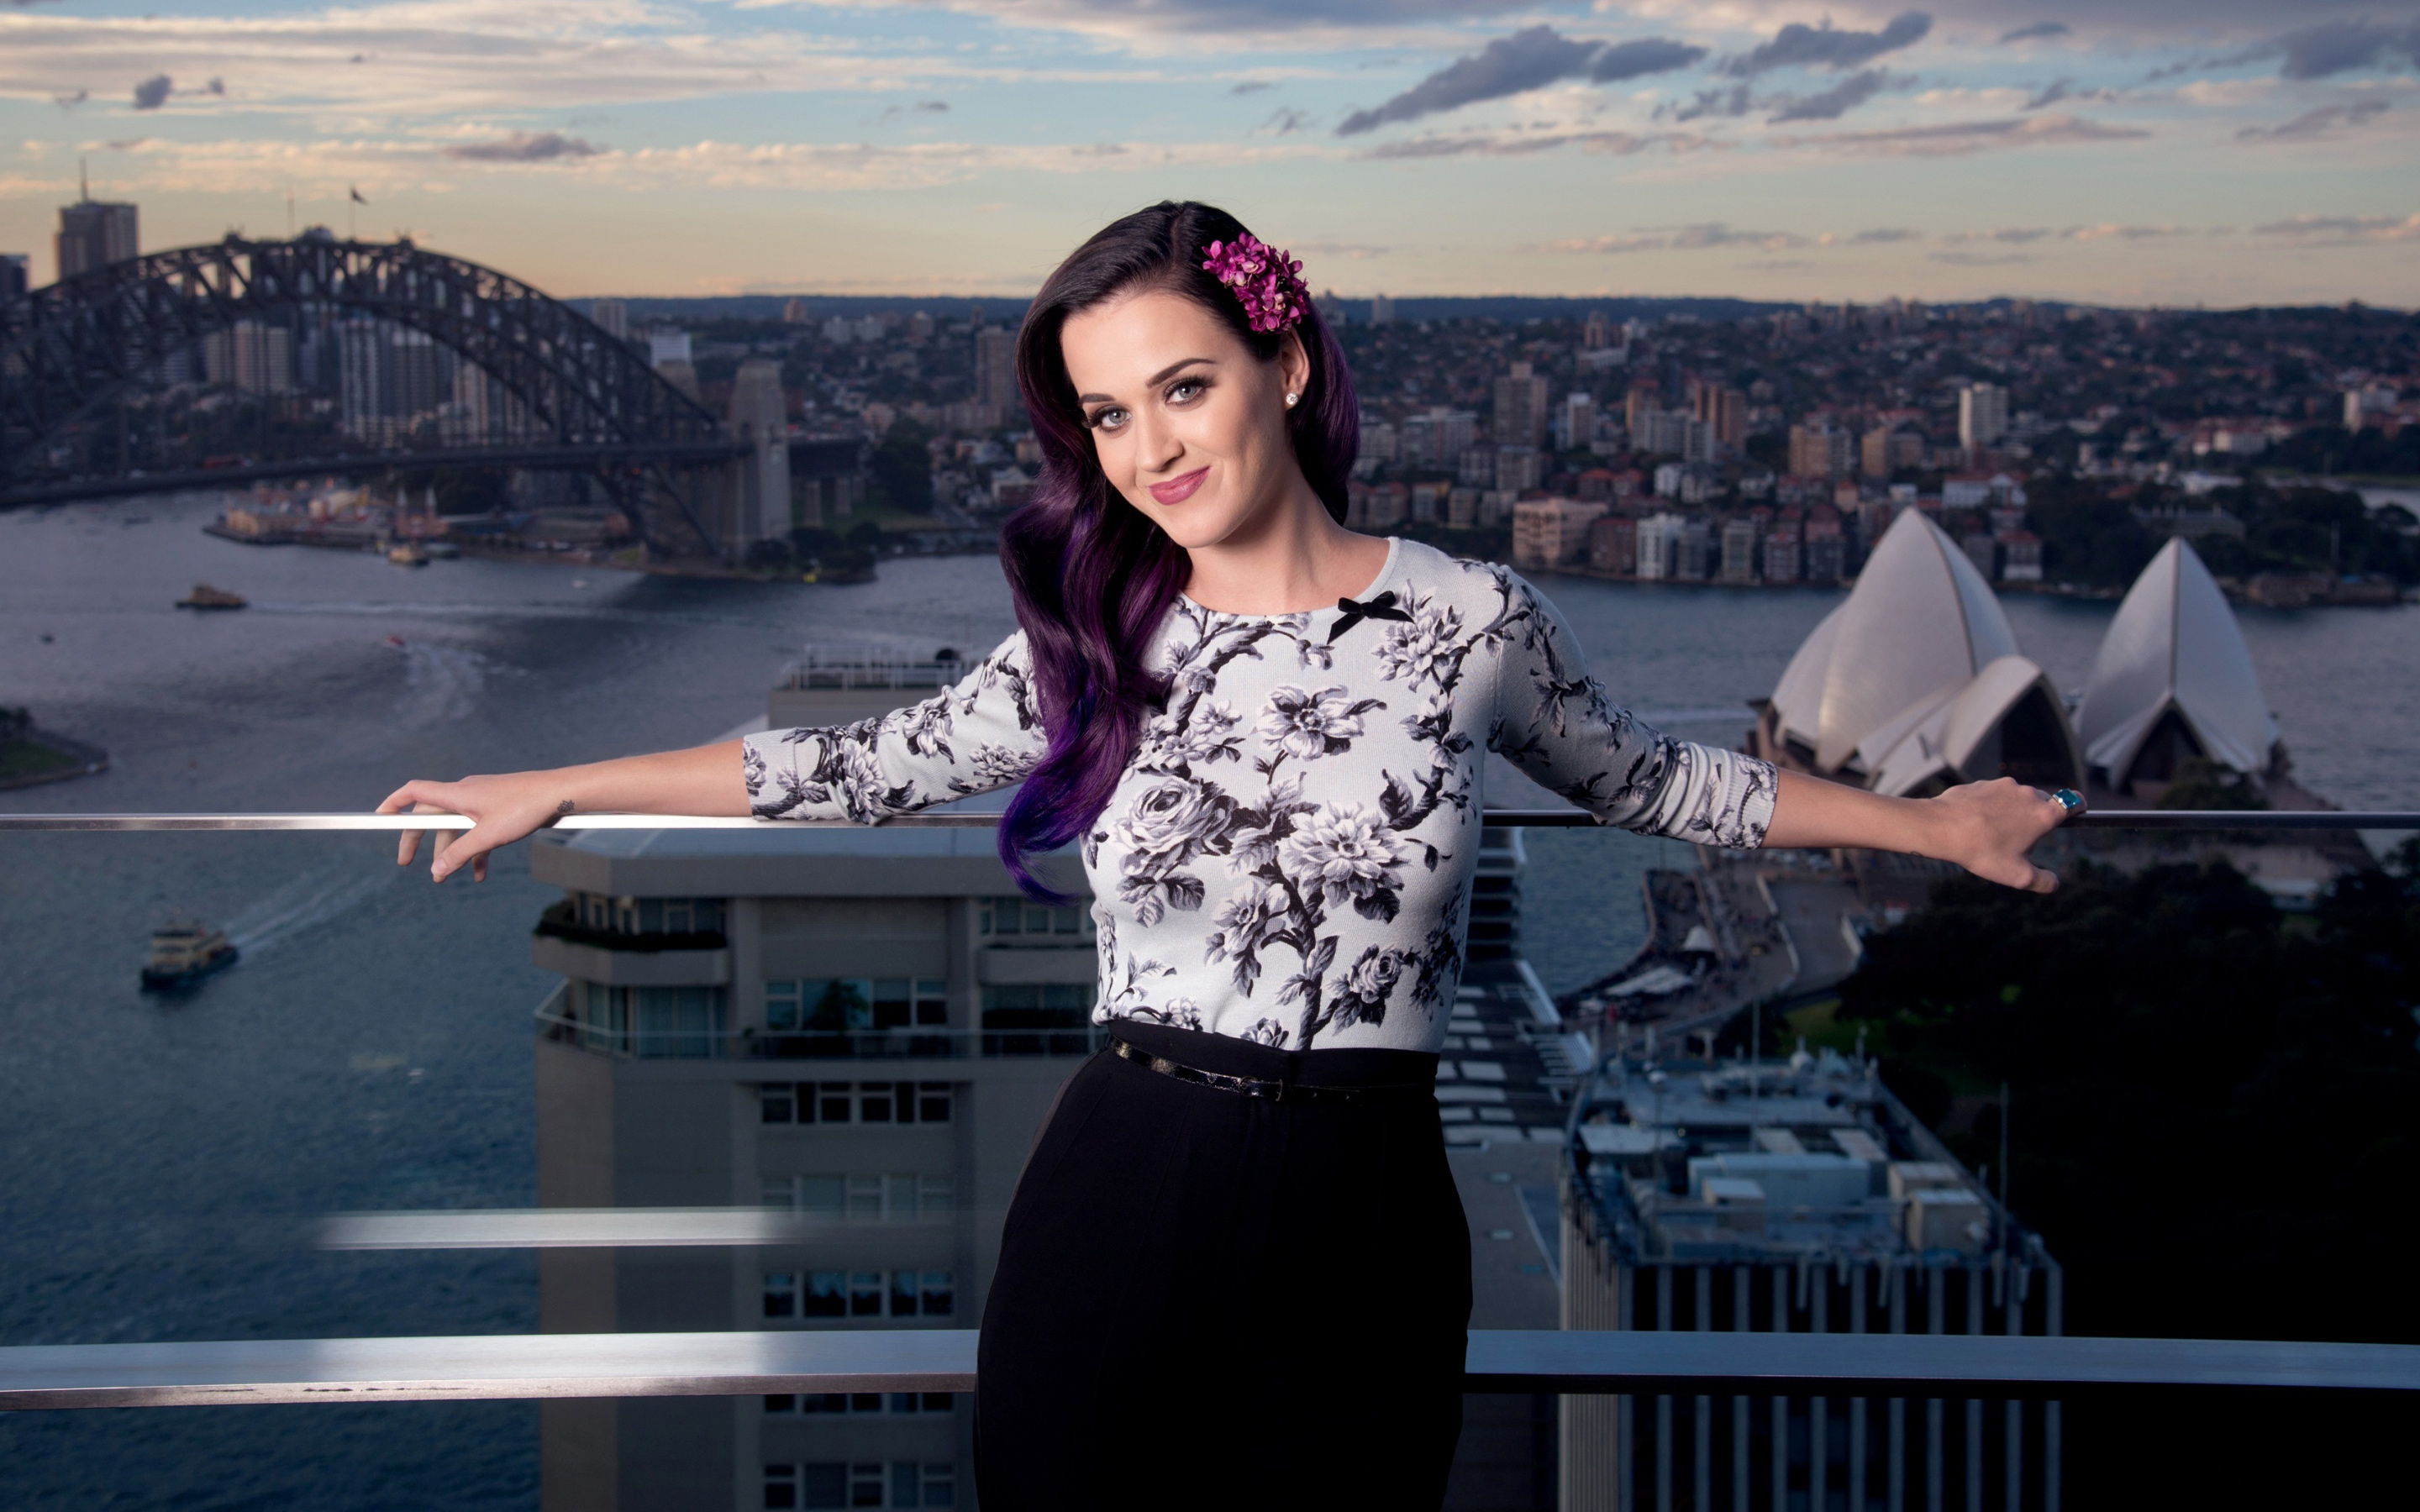 Katy Perry hds Wallpapers